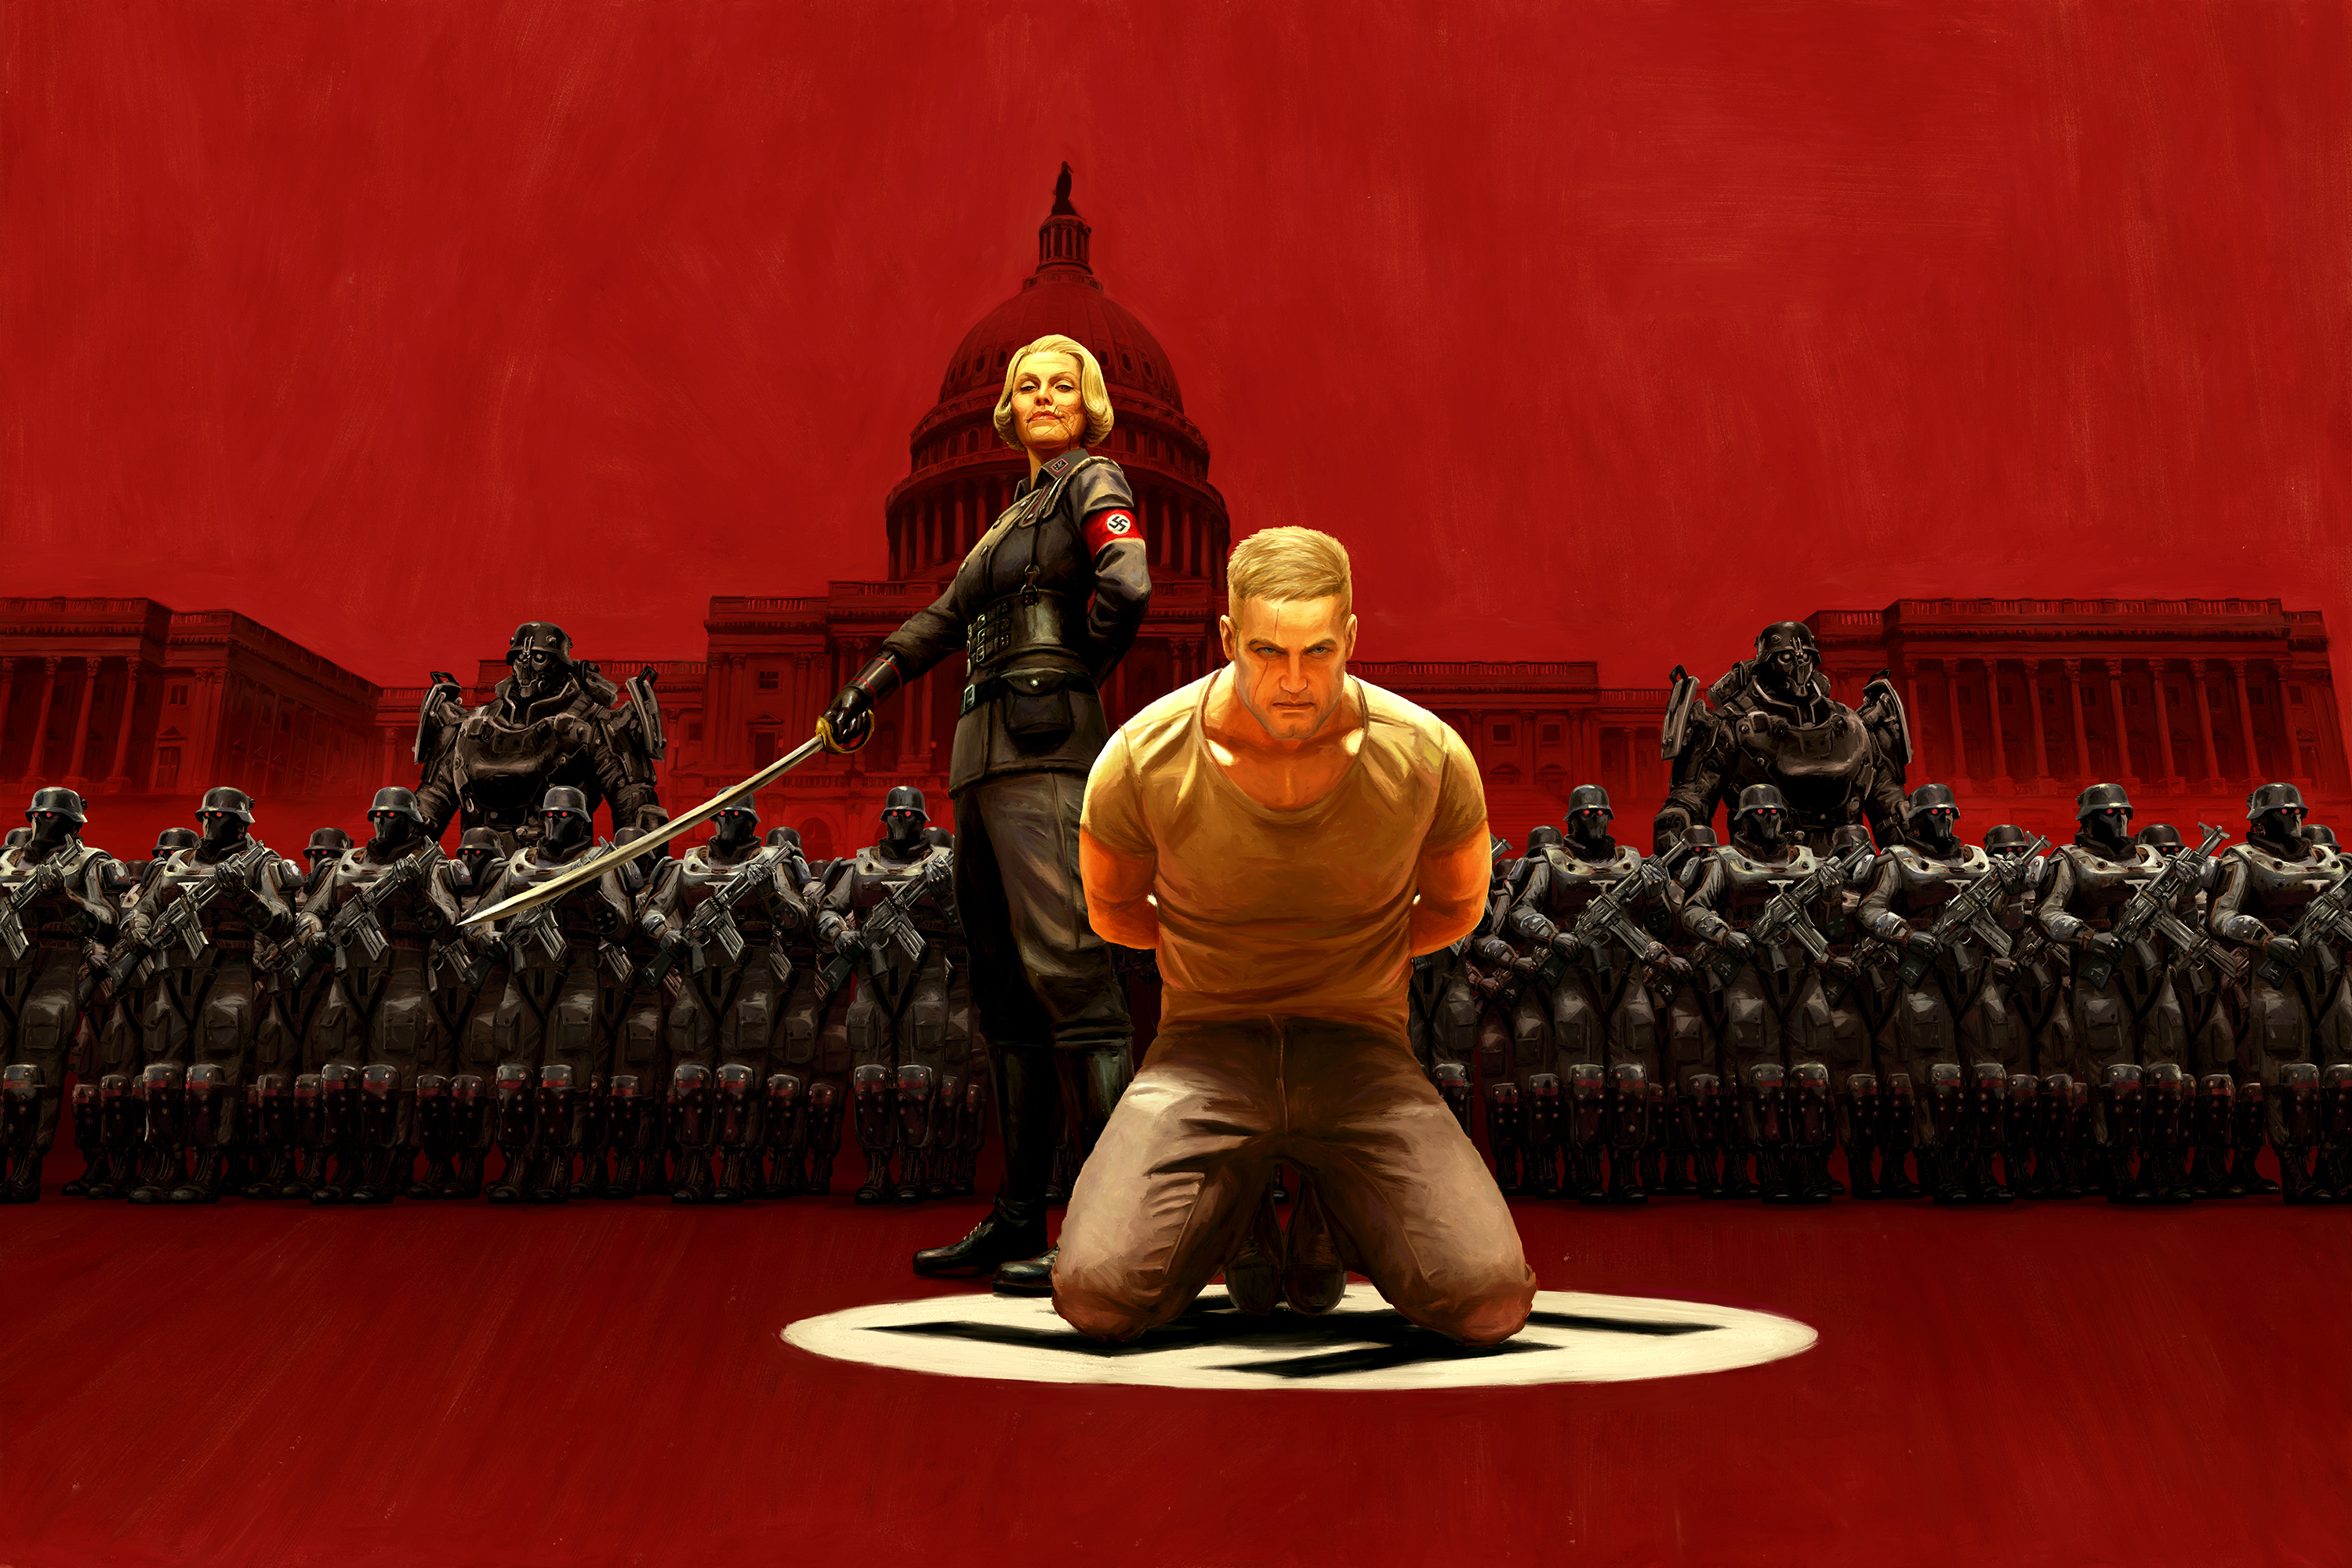 General 3000x2000 Wolfenstein Wolfenstein II: The New Colossus swastika Nazi red sword frontal view video games red background simple background video game men video game characters PC gaming